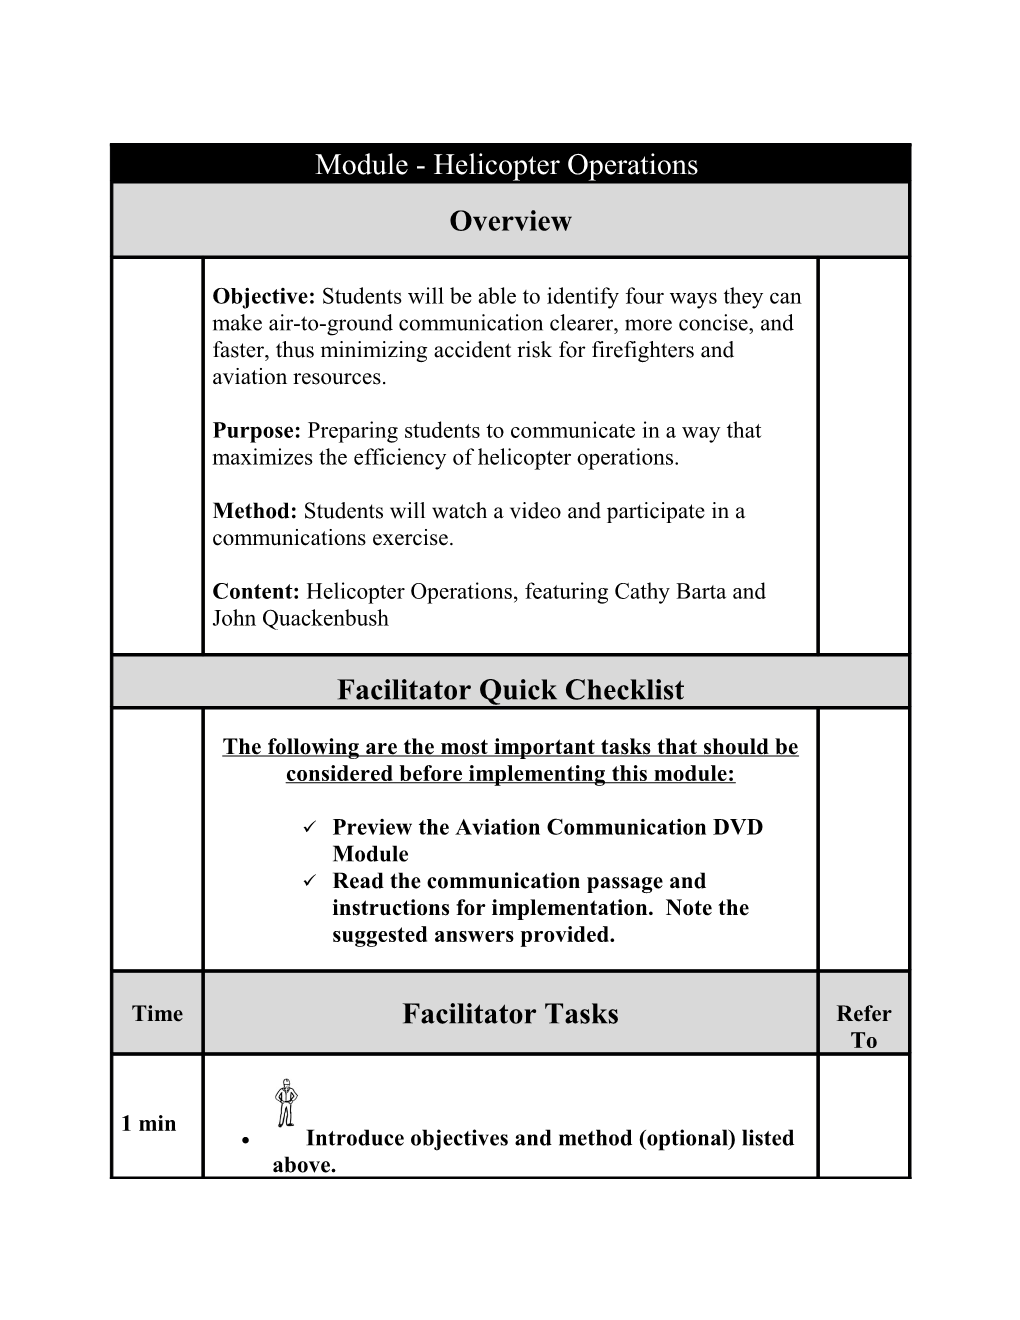 Introduce Objectives and Method (Optional) Listed Above